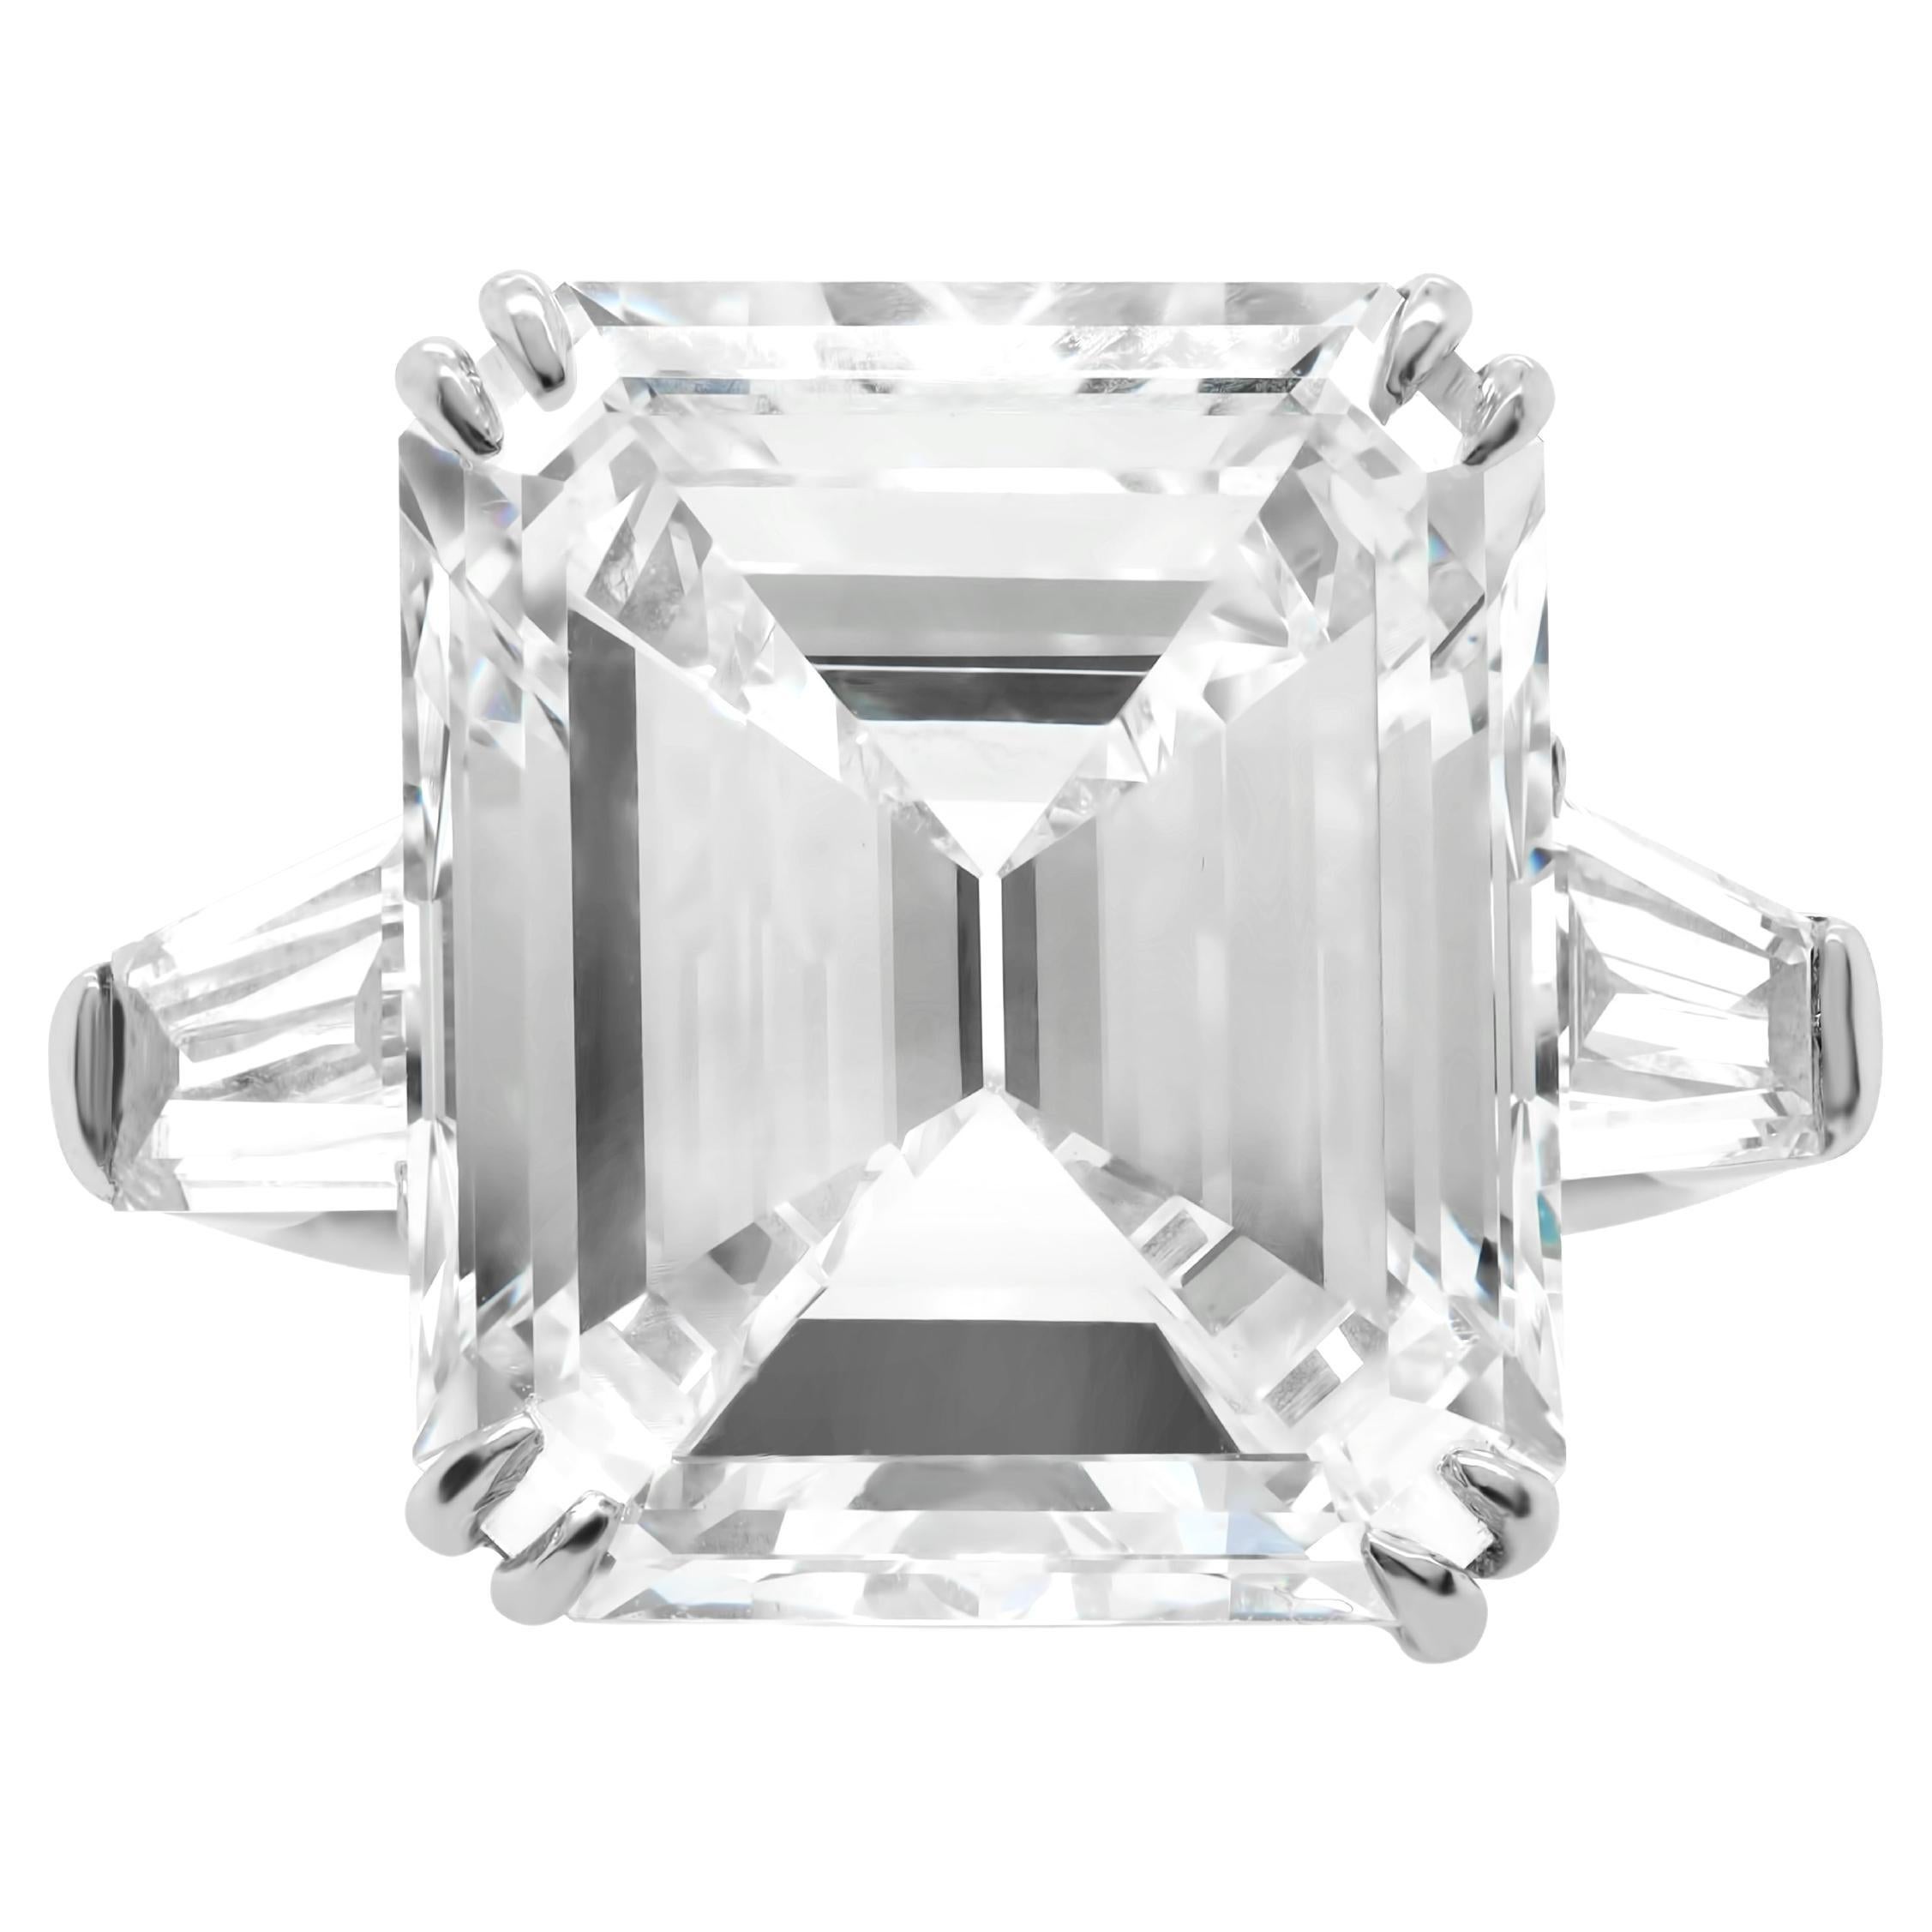 Diana M.  10.03ct Diamond Emerlad Cut J Color SI2 Clarity GIA 100% Eye Clean For Sale